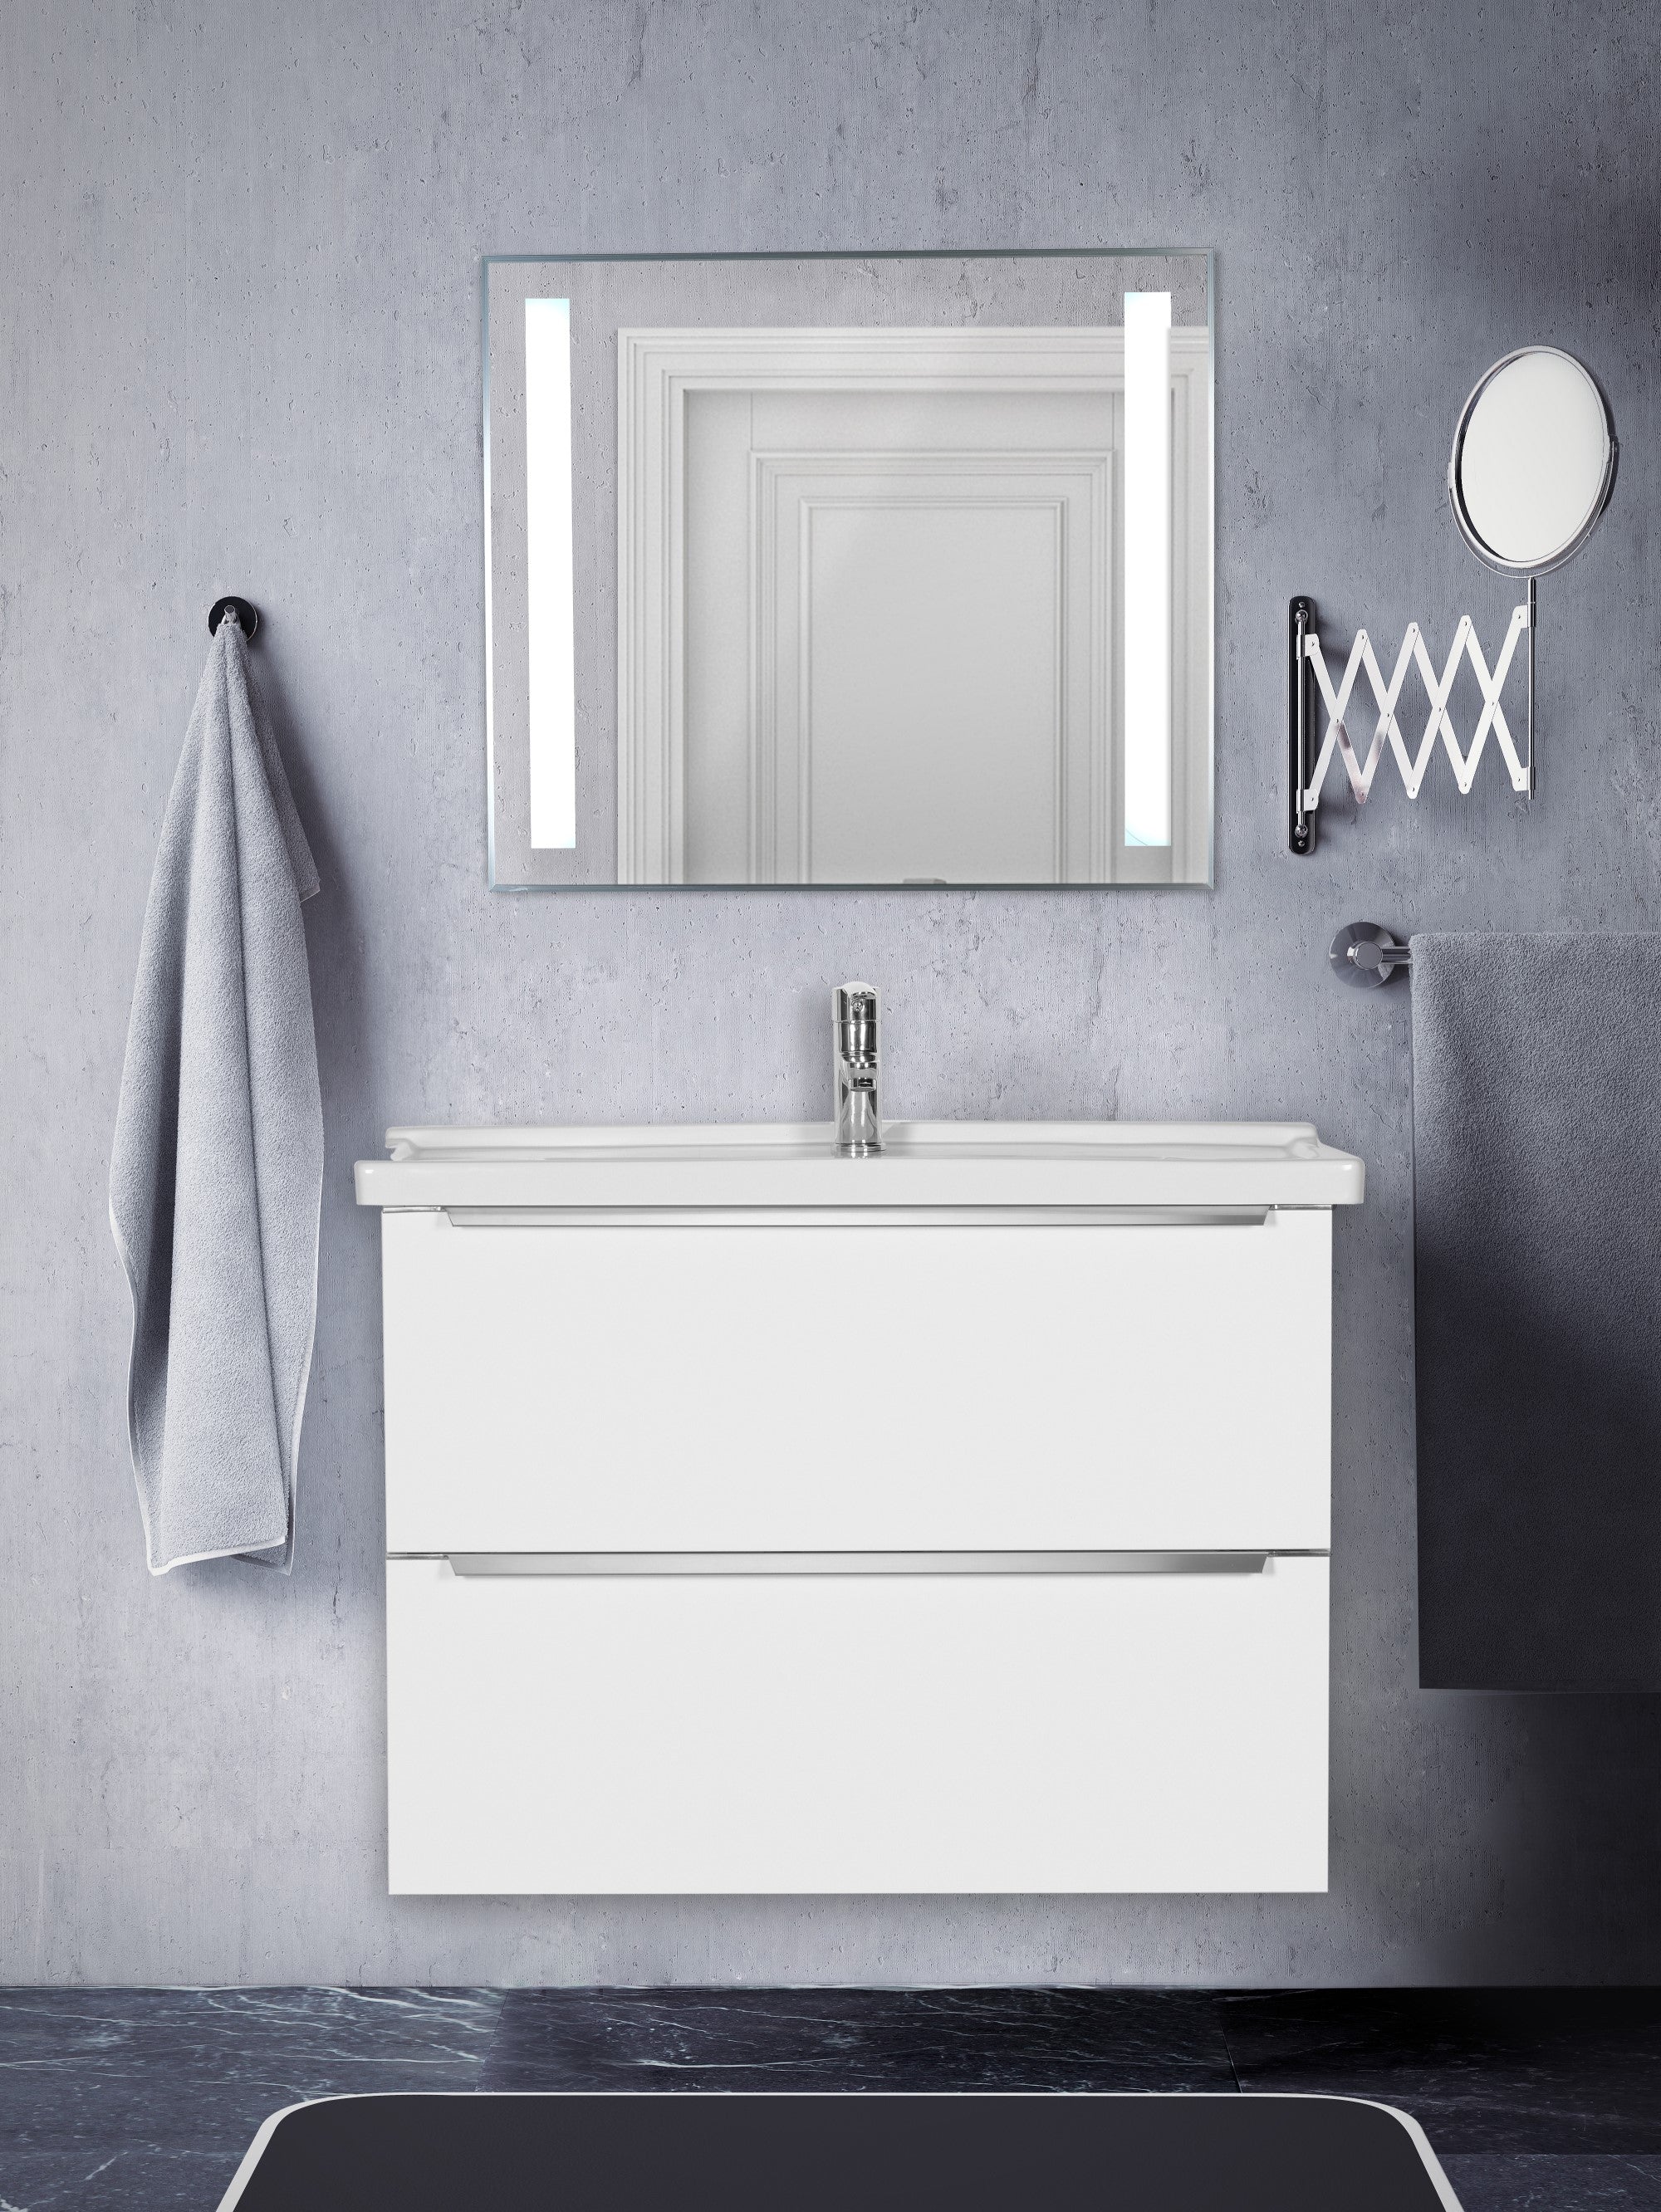 ARGENTO 24 INCH MODERN WALL MOUNT VANITY AND SINK COMBO WITH LED MIRROR - FOGIA GRAY